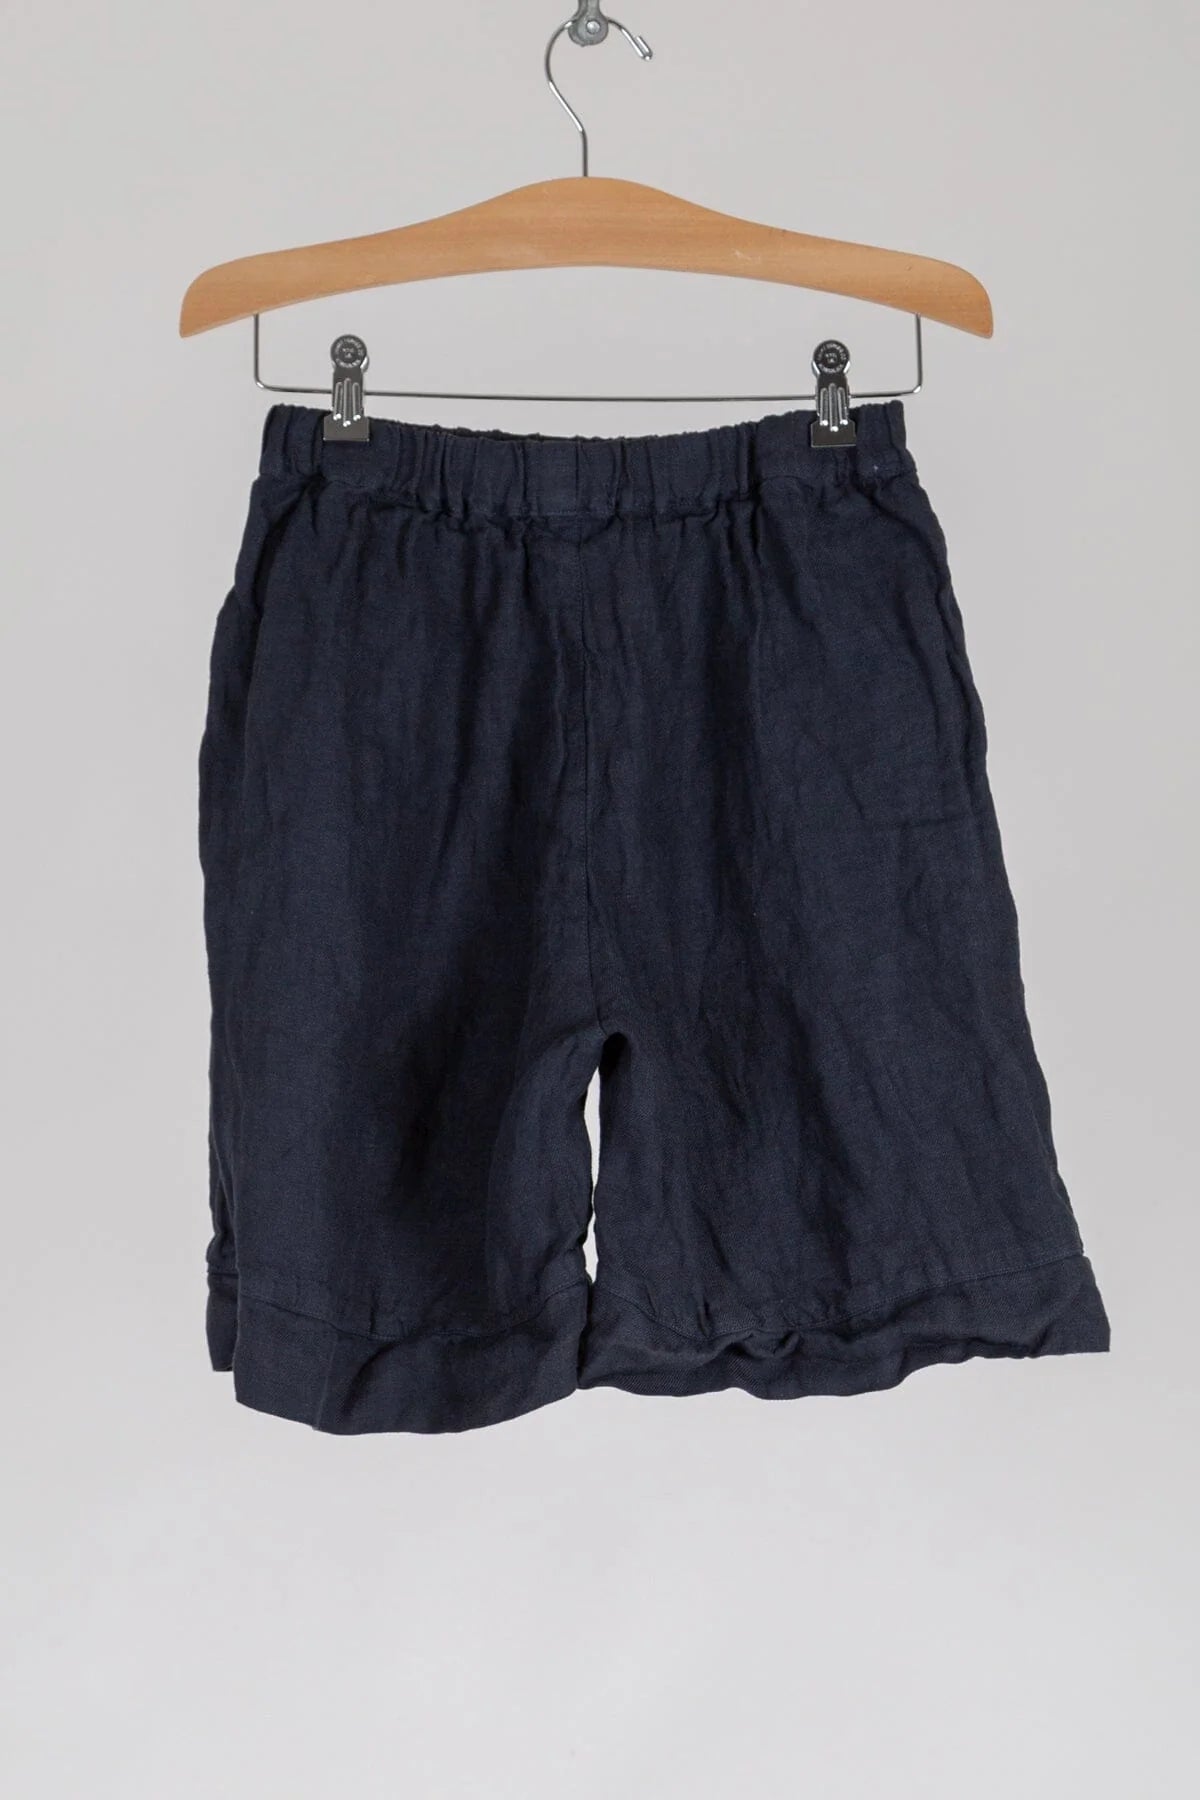 CP Shades - Piper Shorts in White/Black Linen